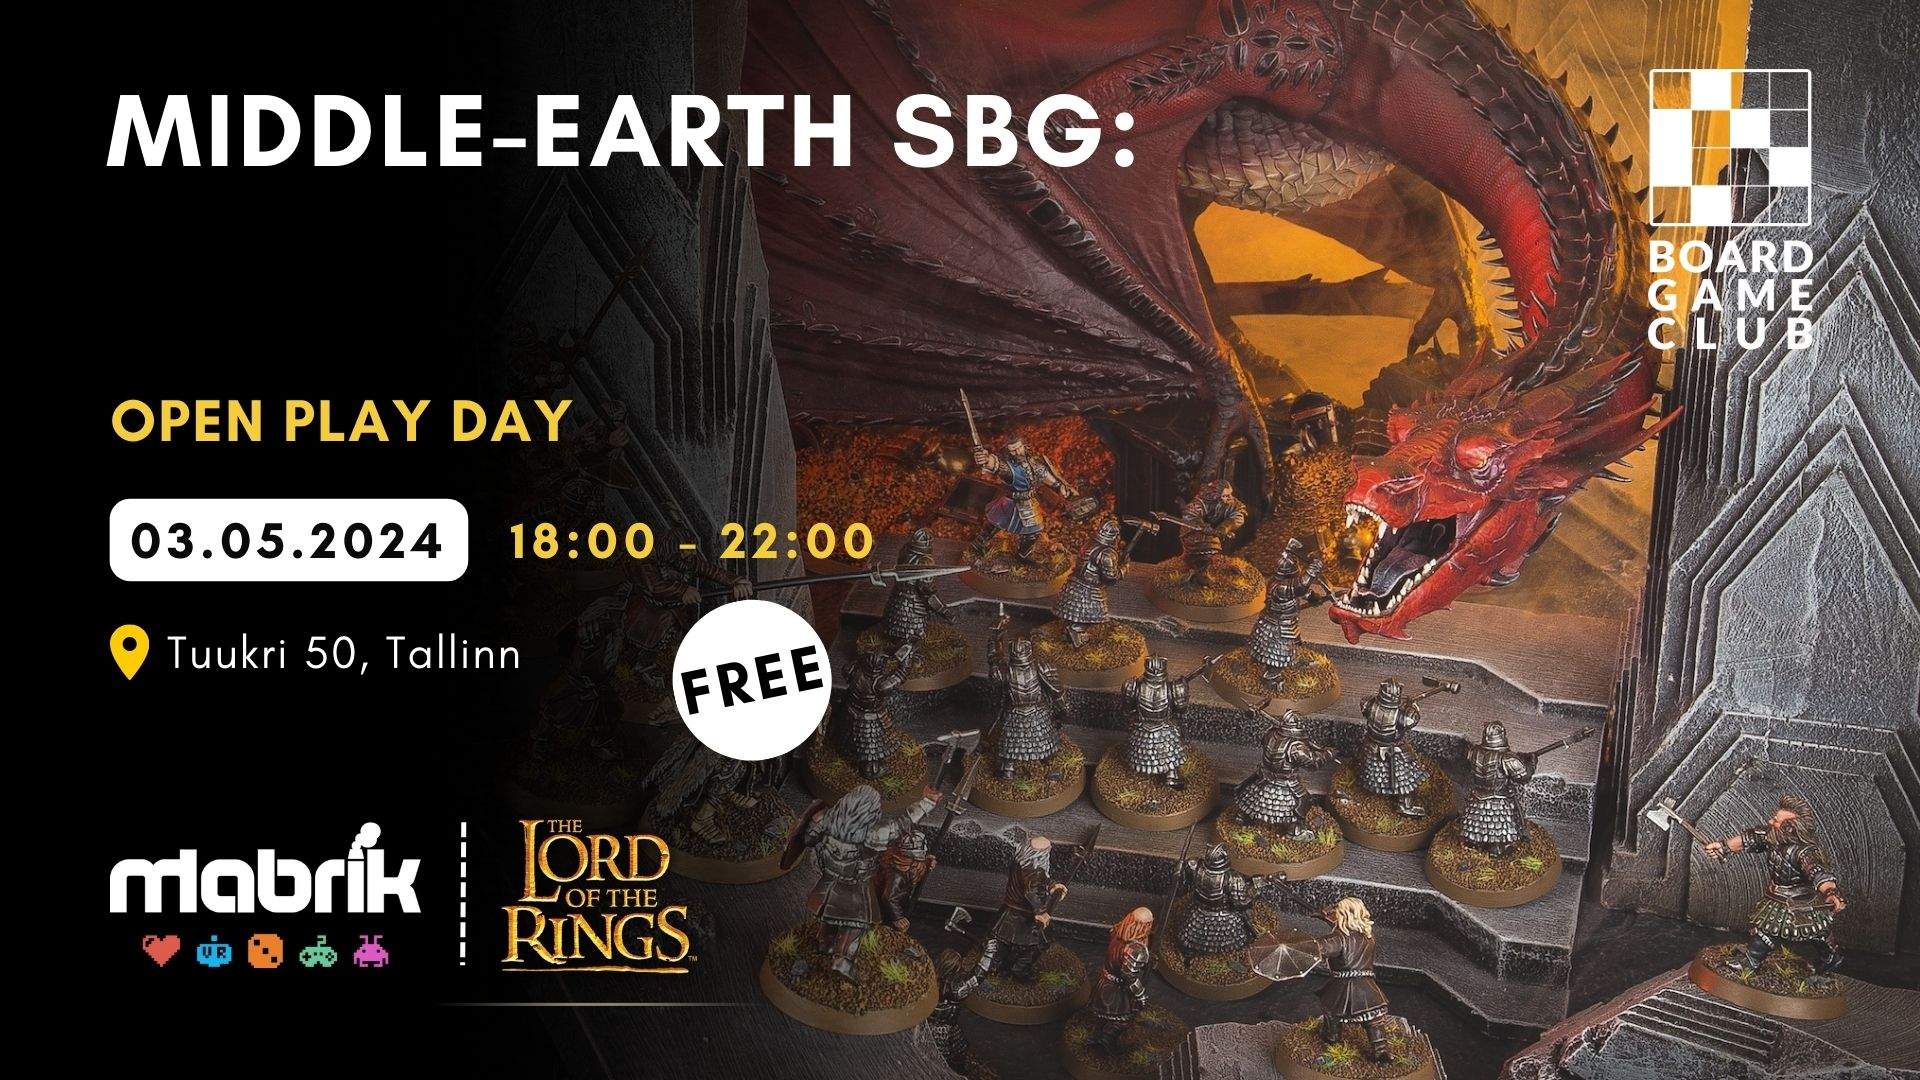 Events - 03.05.2024 - Middle-Earth SBG - Open Play Day